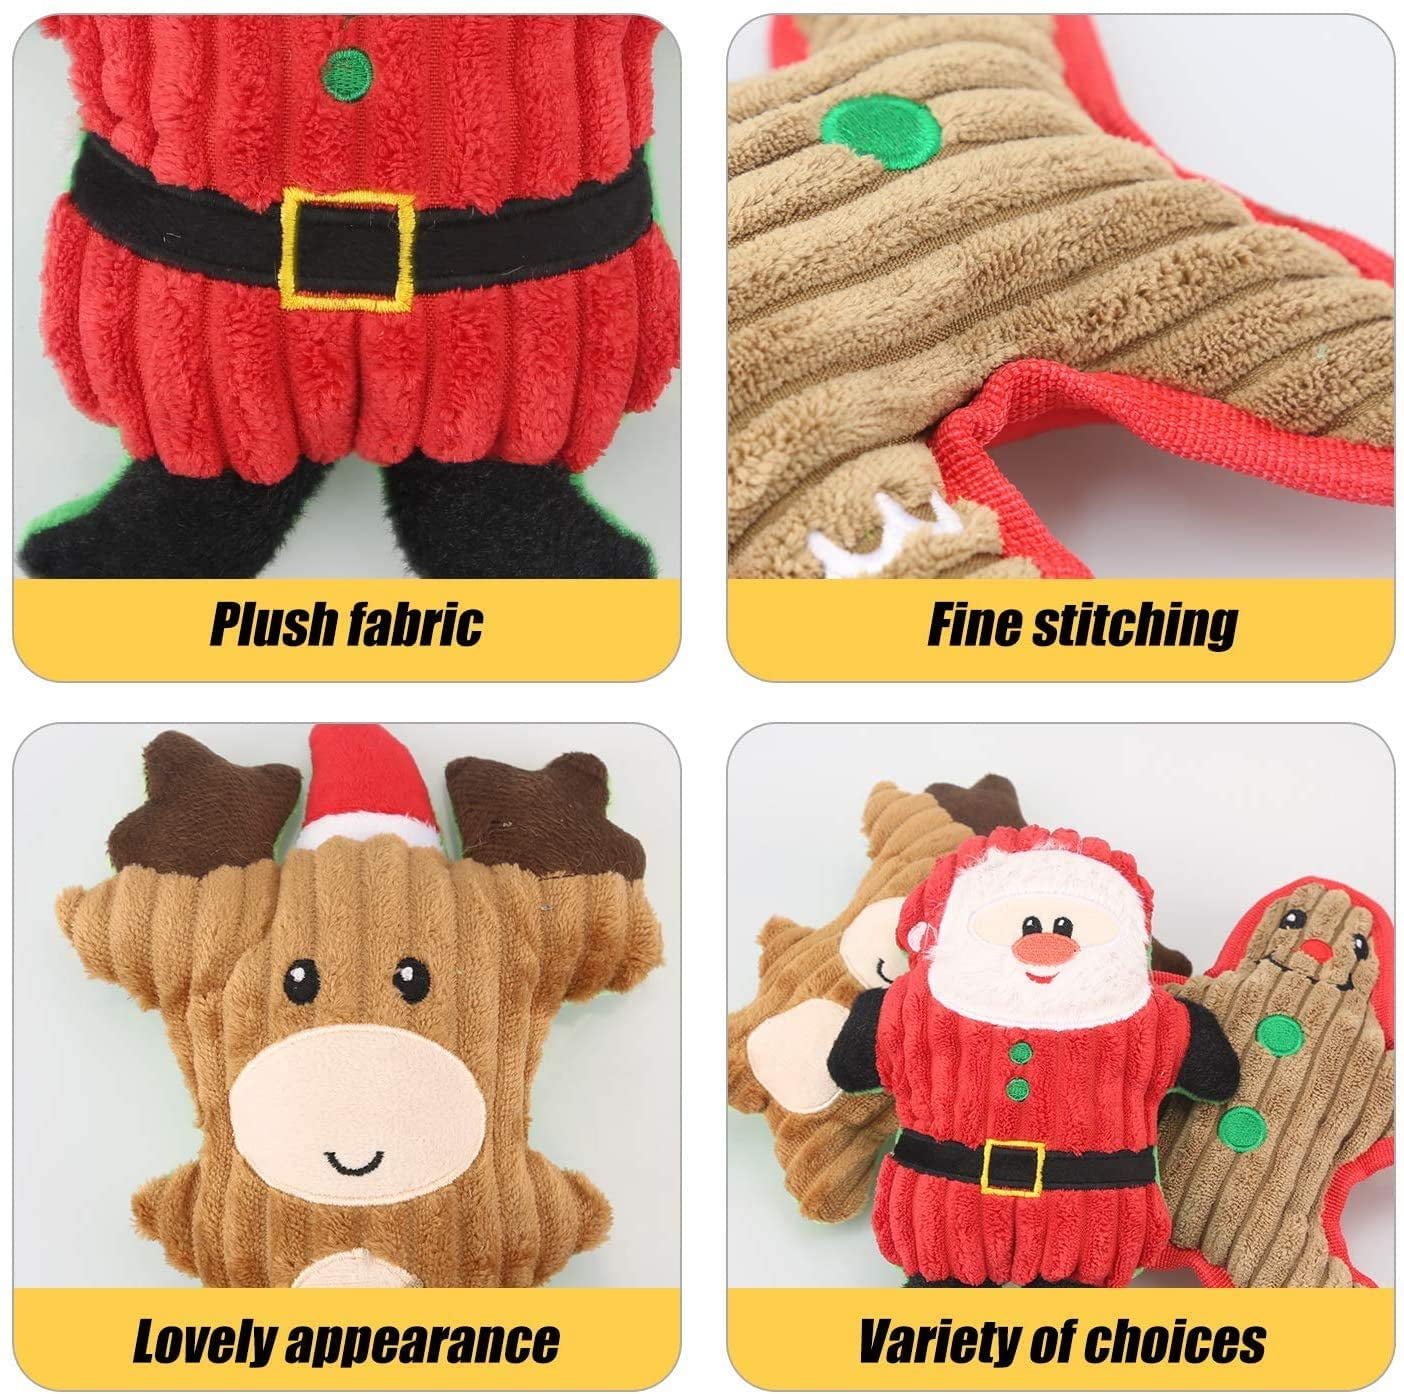 Deomfe Christmas Dog Toys for Large Dogs - Plush Interactive Squeaky Puppy  Toys